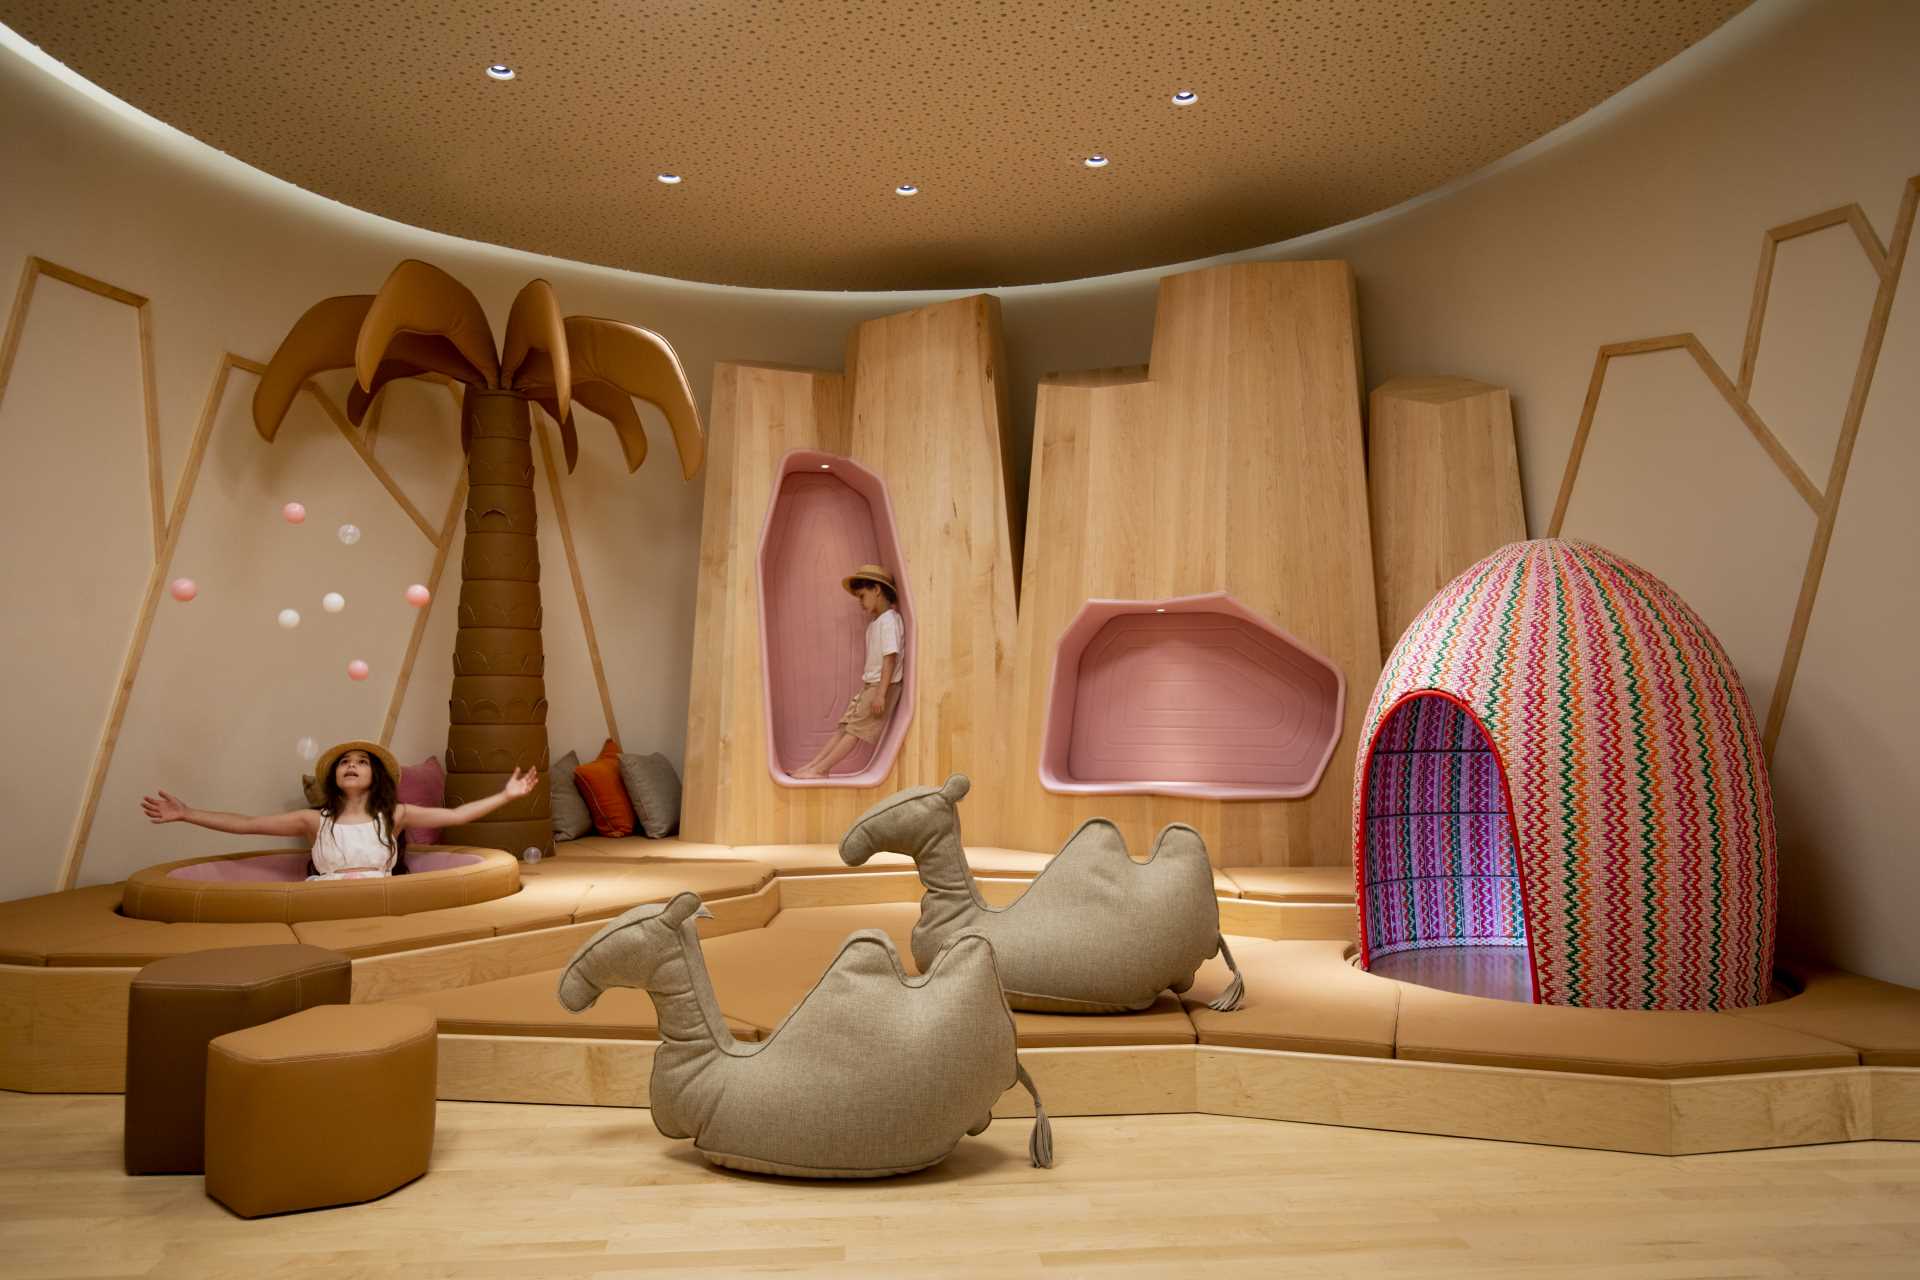 A modern kids playroom inspired by the desert, with sand dunes, sculptural desert mountains, camels, and palm trees.